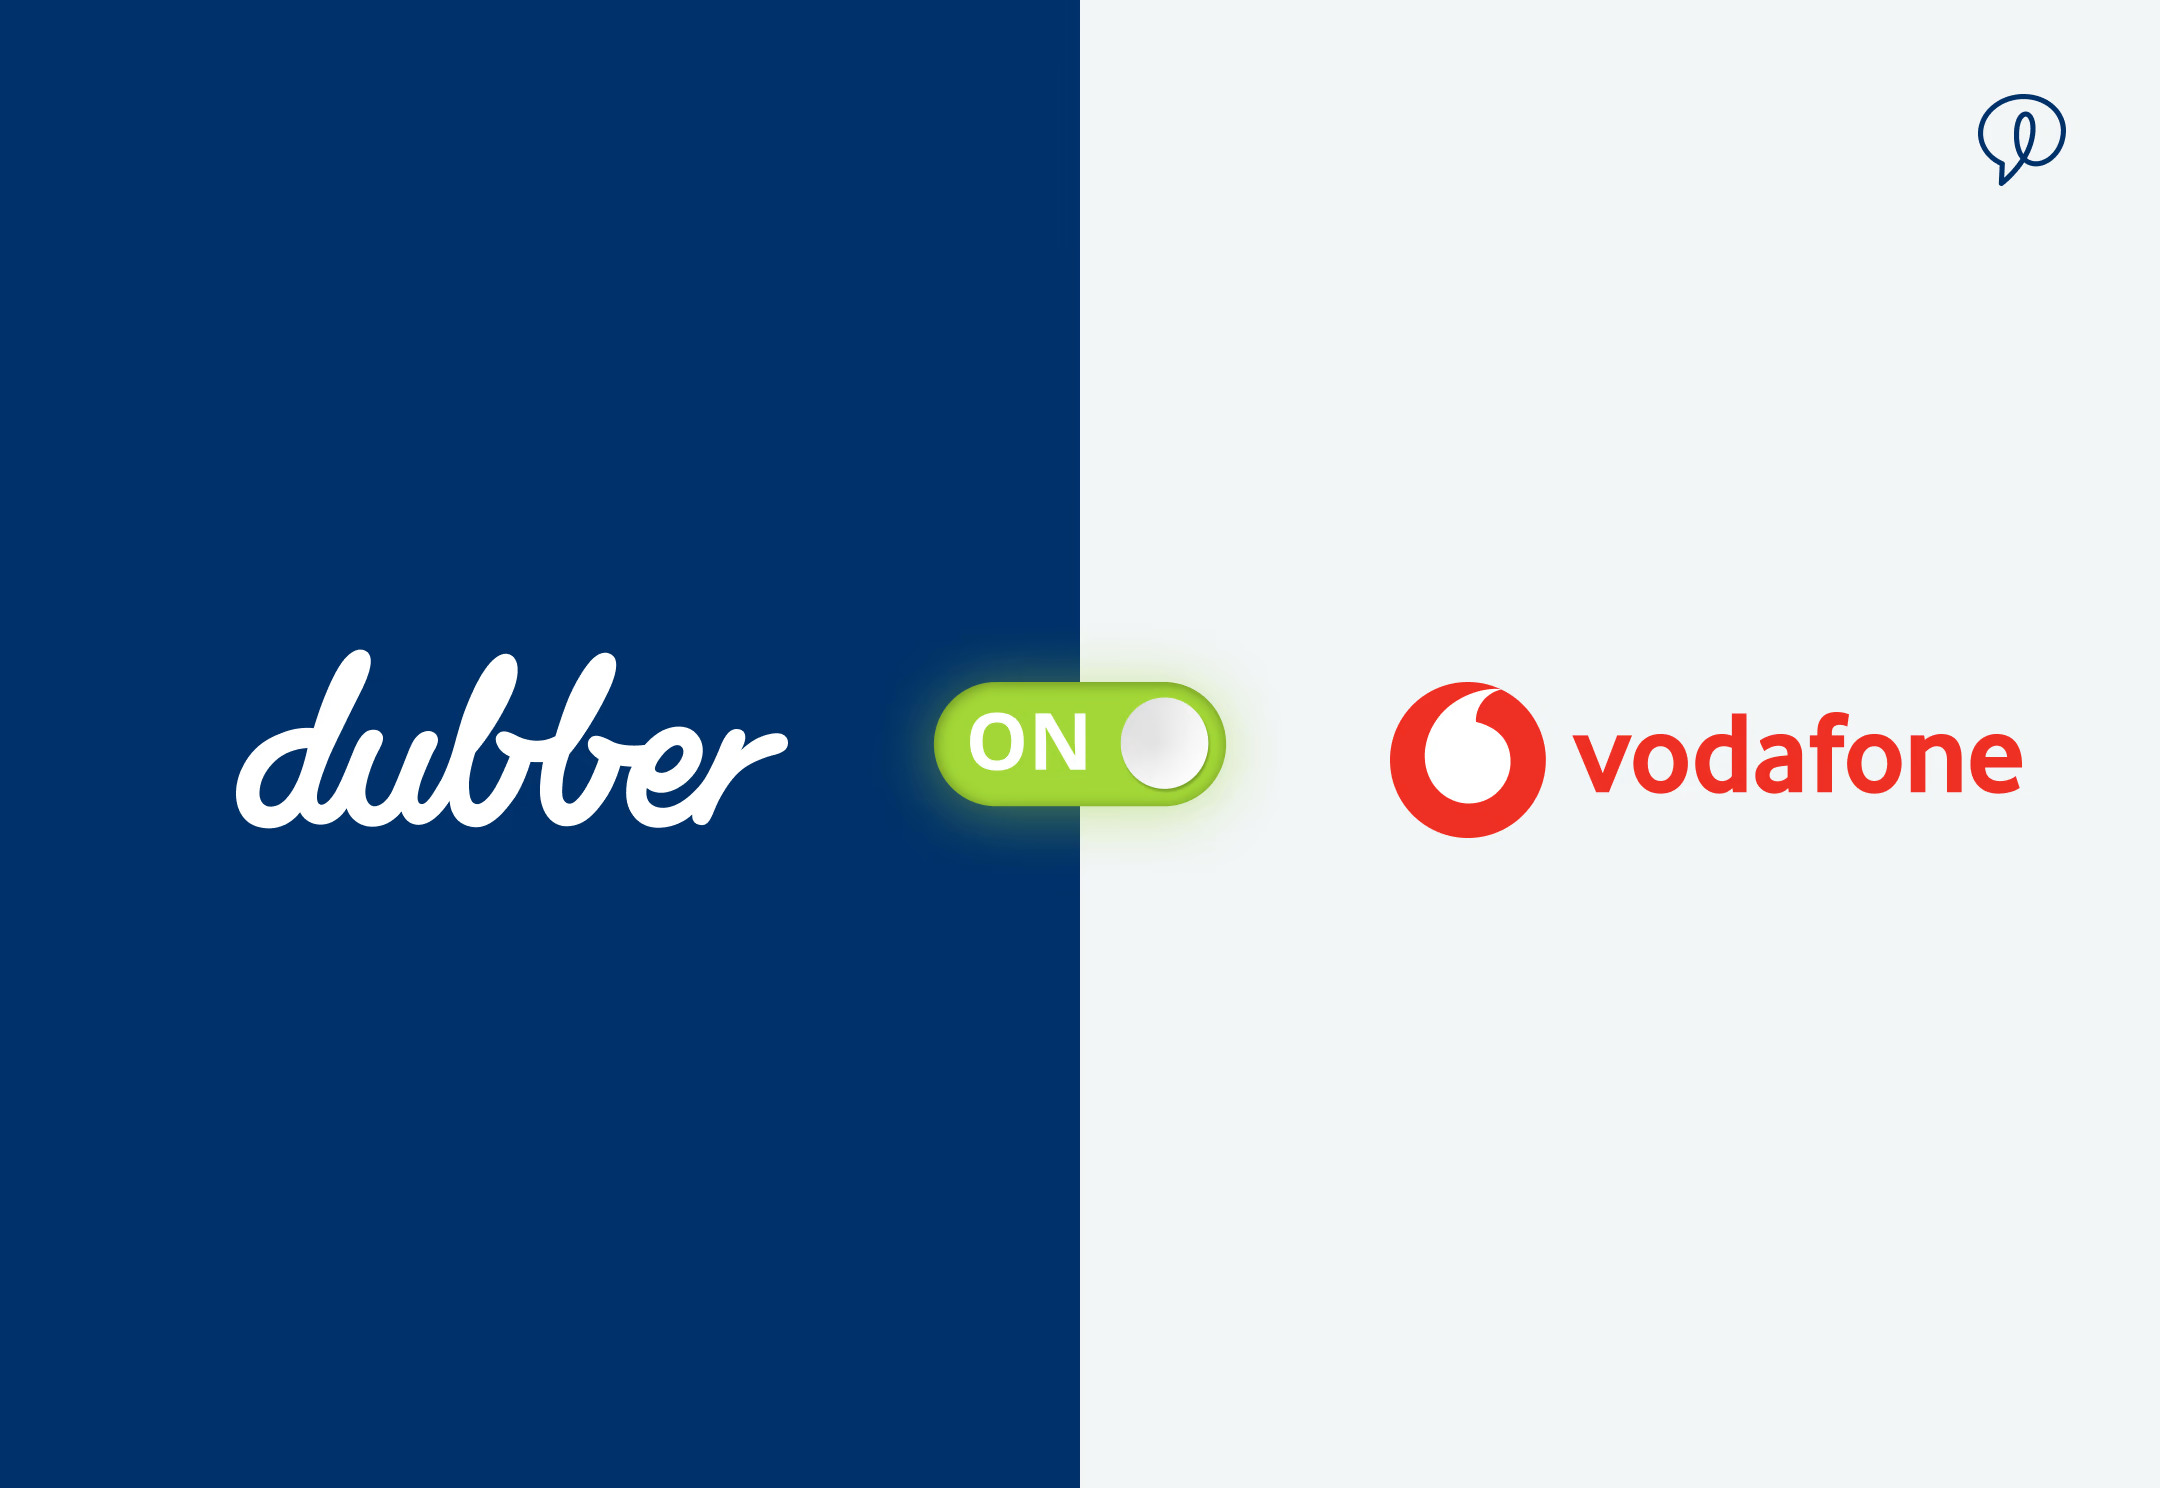 Vodafone Selects Dubber for UK & Europe Mobile Networks